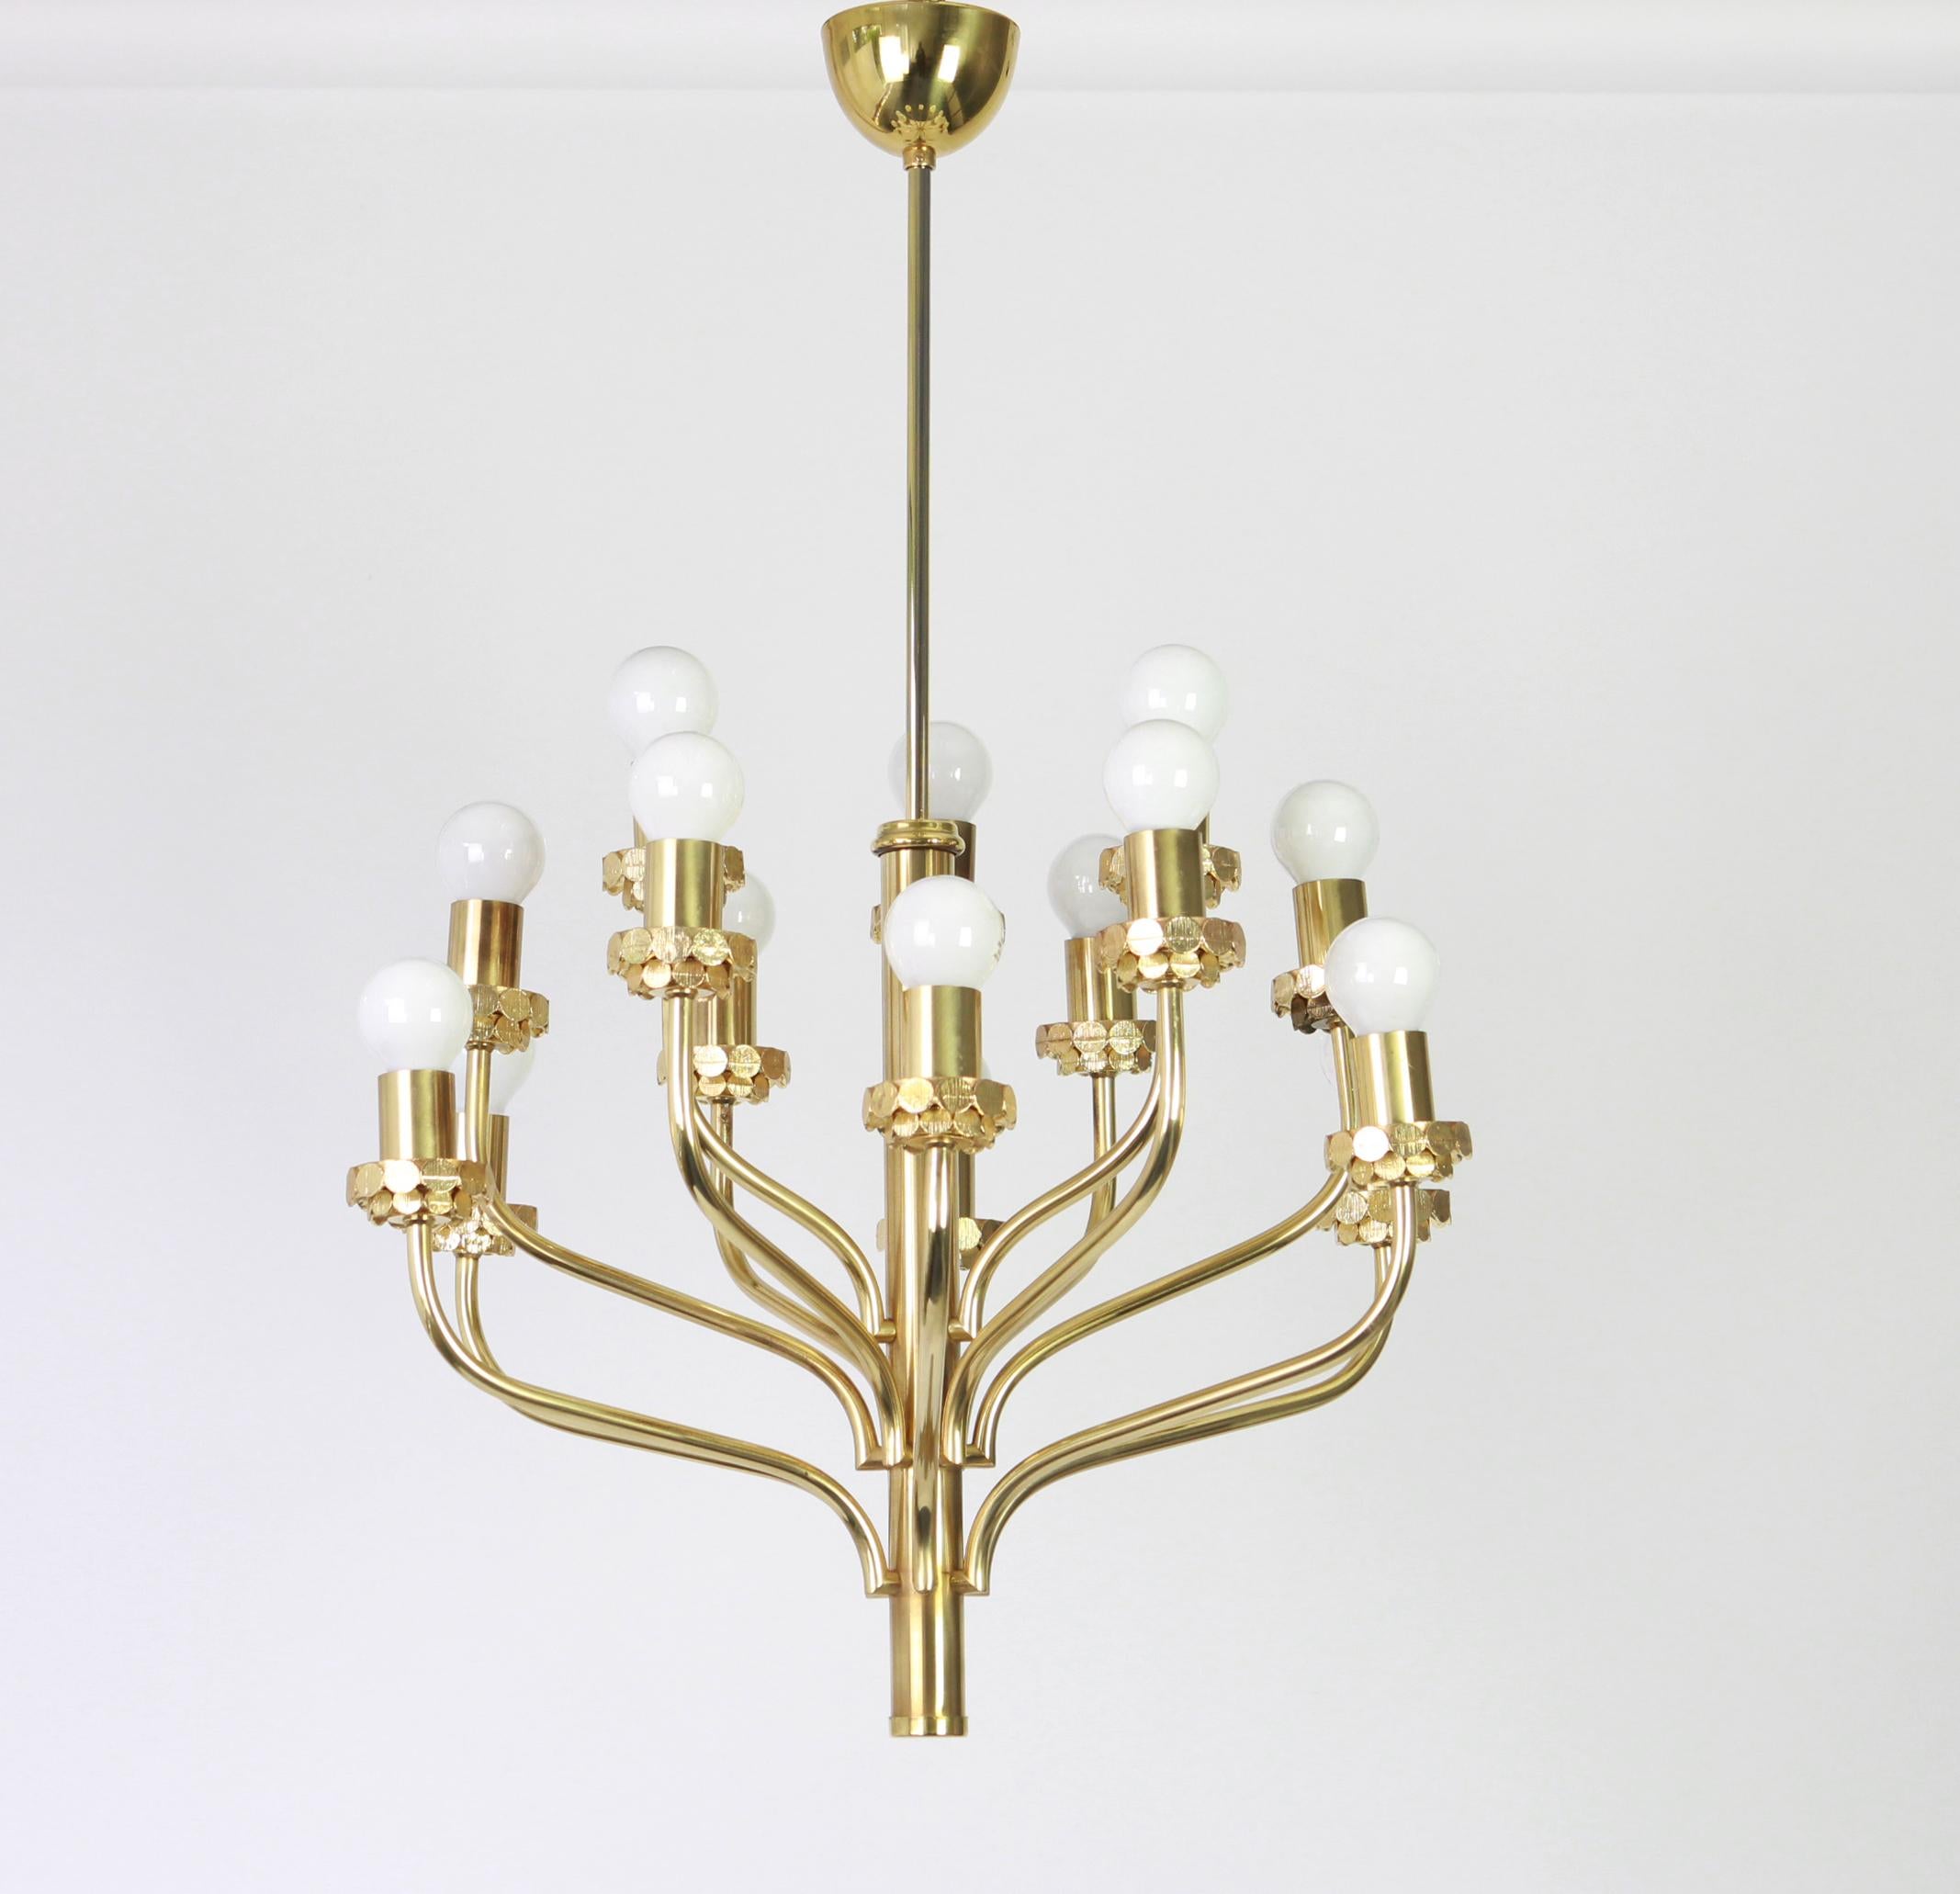 Wonderful midcentury brass chandelier in the manner of Sciolari made by Staff Leuchten, manufactured in Germany, circa 1970s.

Sockets: 15 x E14 small bulbs./ max. 40 watt each-
Light bulbs are not included. It is possible to install this fixture